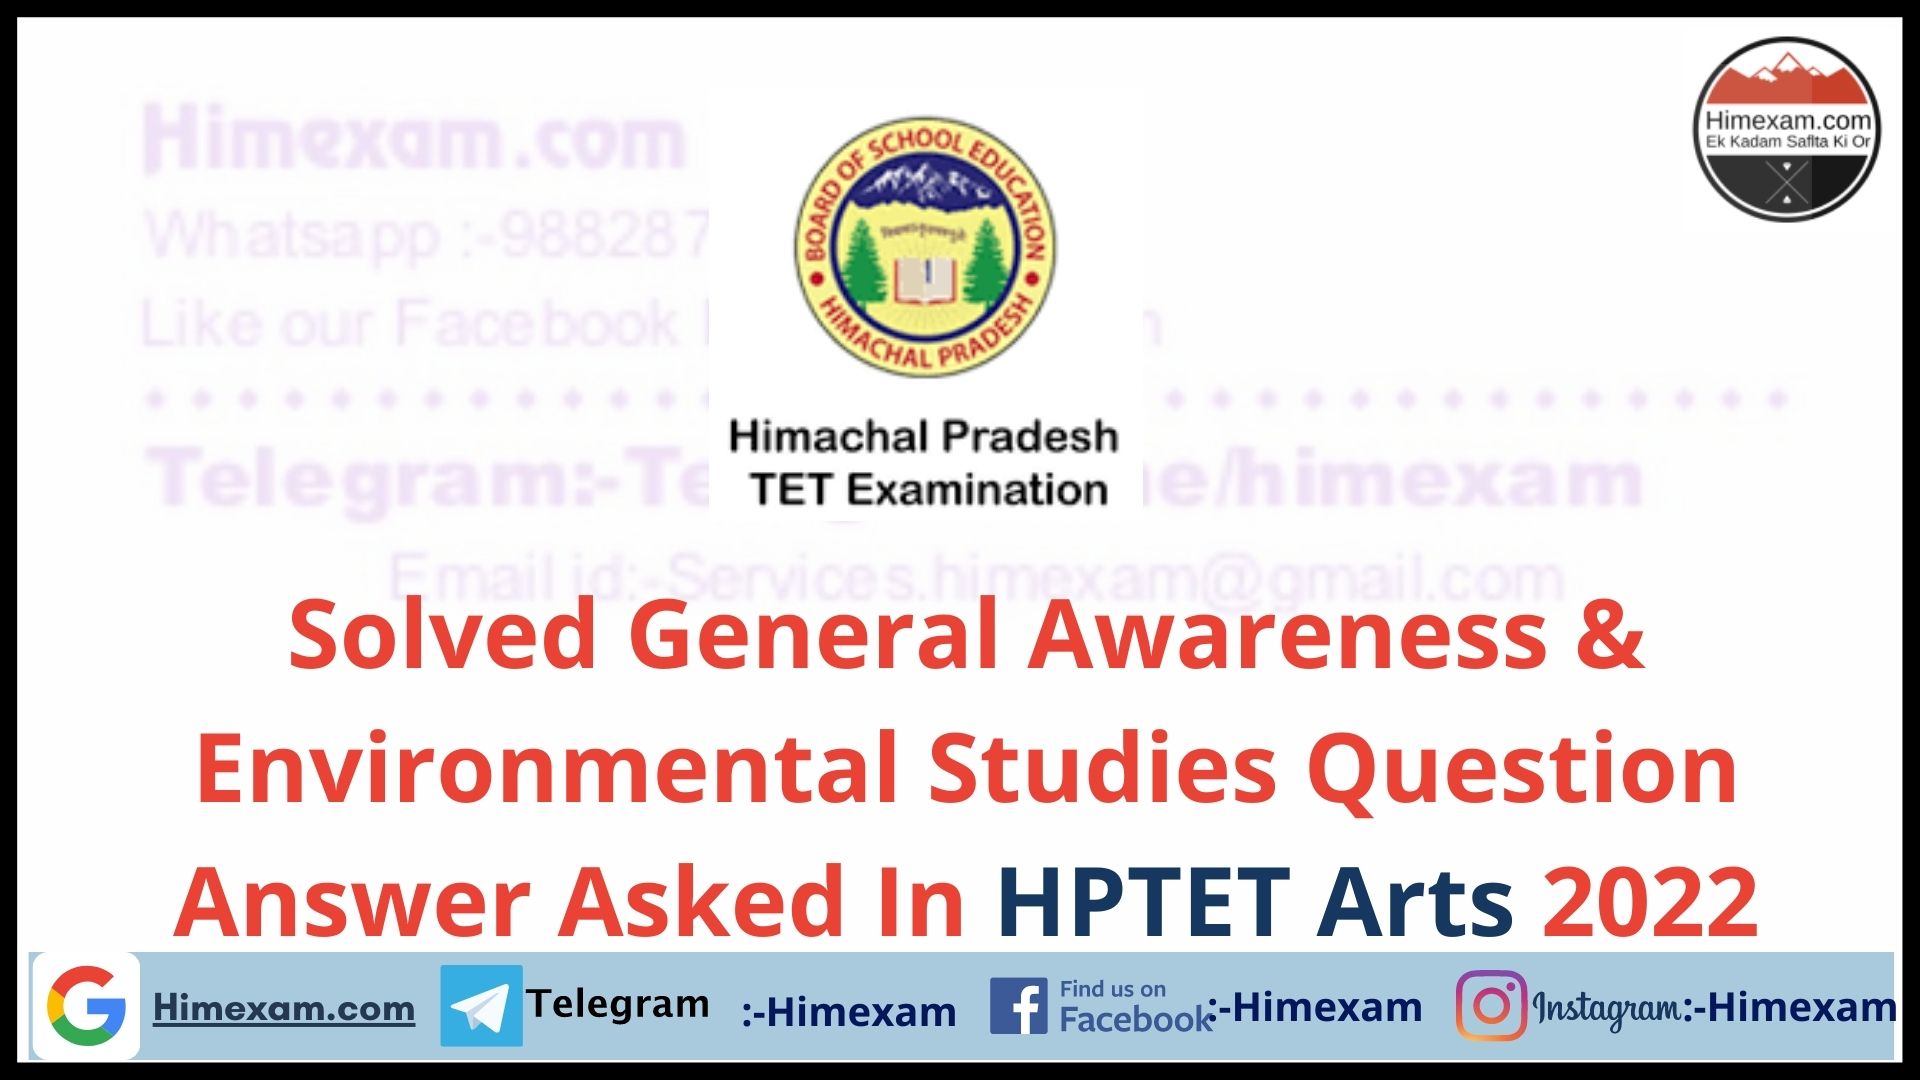 General Awareness & Environmental Studies Question Answer Asked In HPTET Arts 2022